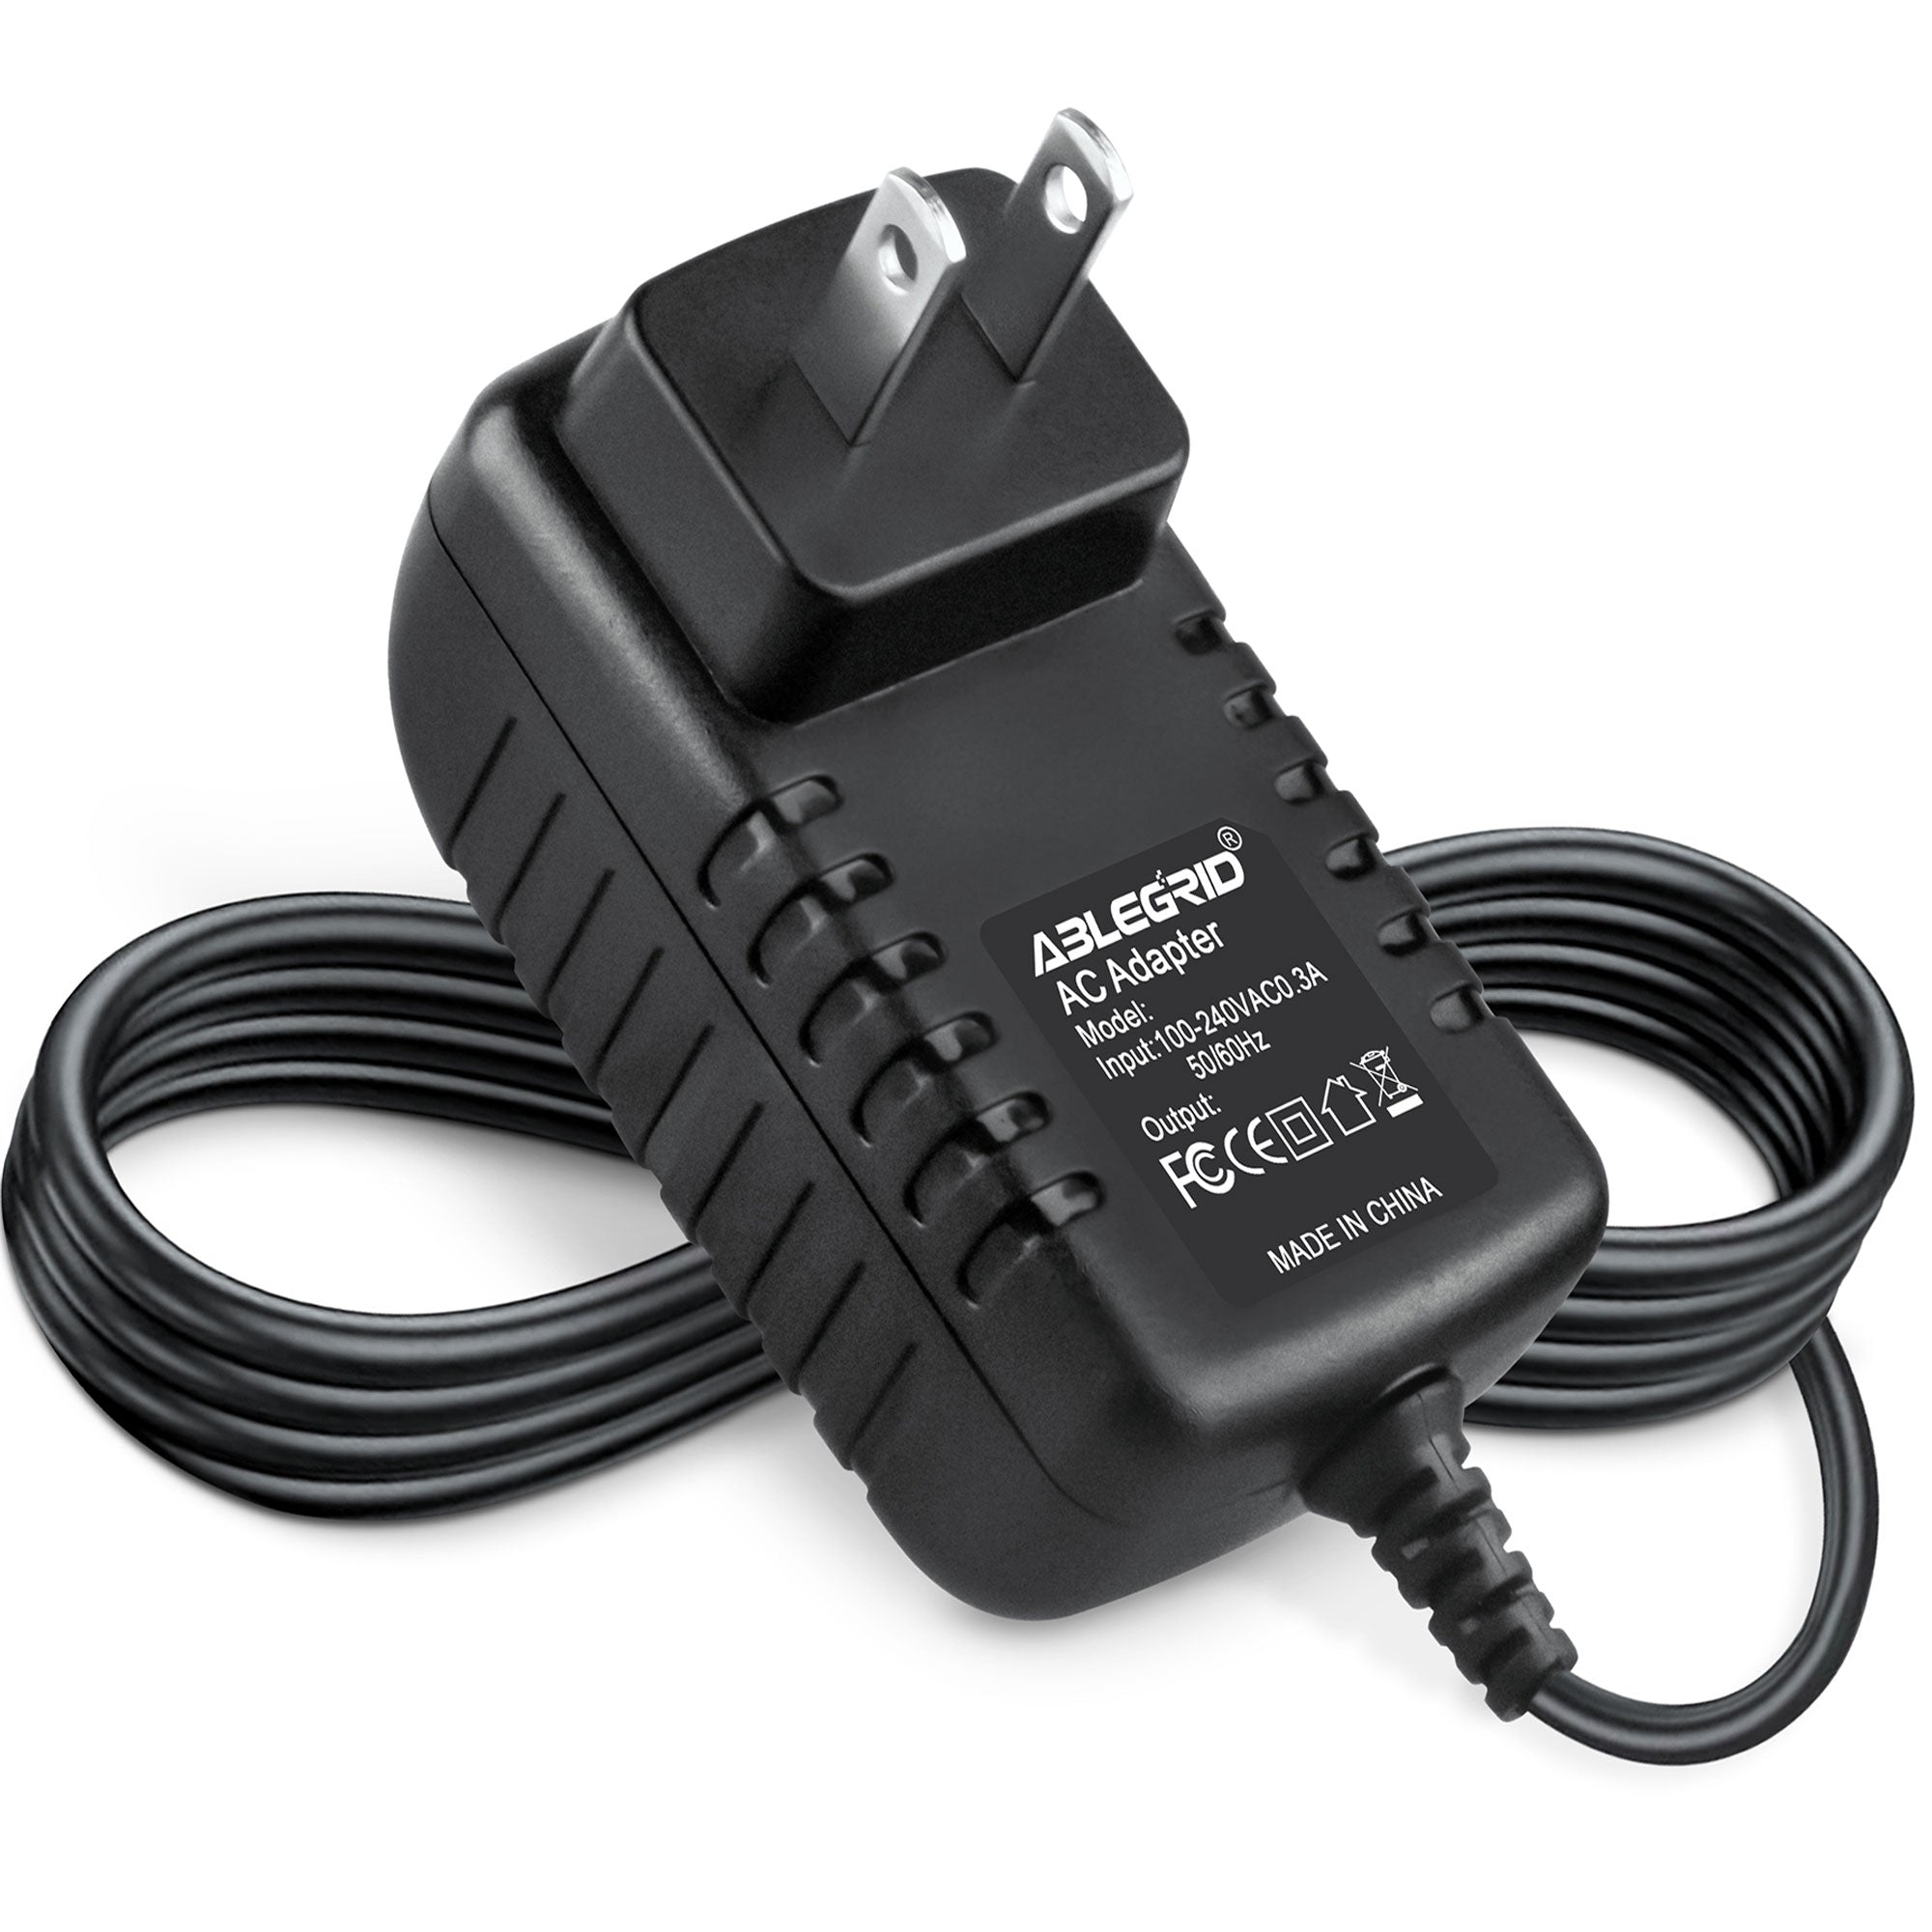 AbleGrid AC-DC Adapter for Powertron Electronics Corp. Model: PA1015-2DU PA10152DU P/N: PA1015-120DUB PA1015120DUB Power Supply Cord Cable PS Wall Home Charger Input: 100 - 240 VAC Worldwide Use Mains PSU